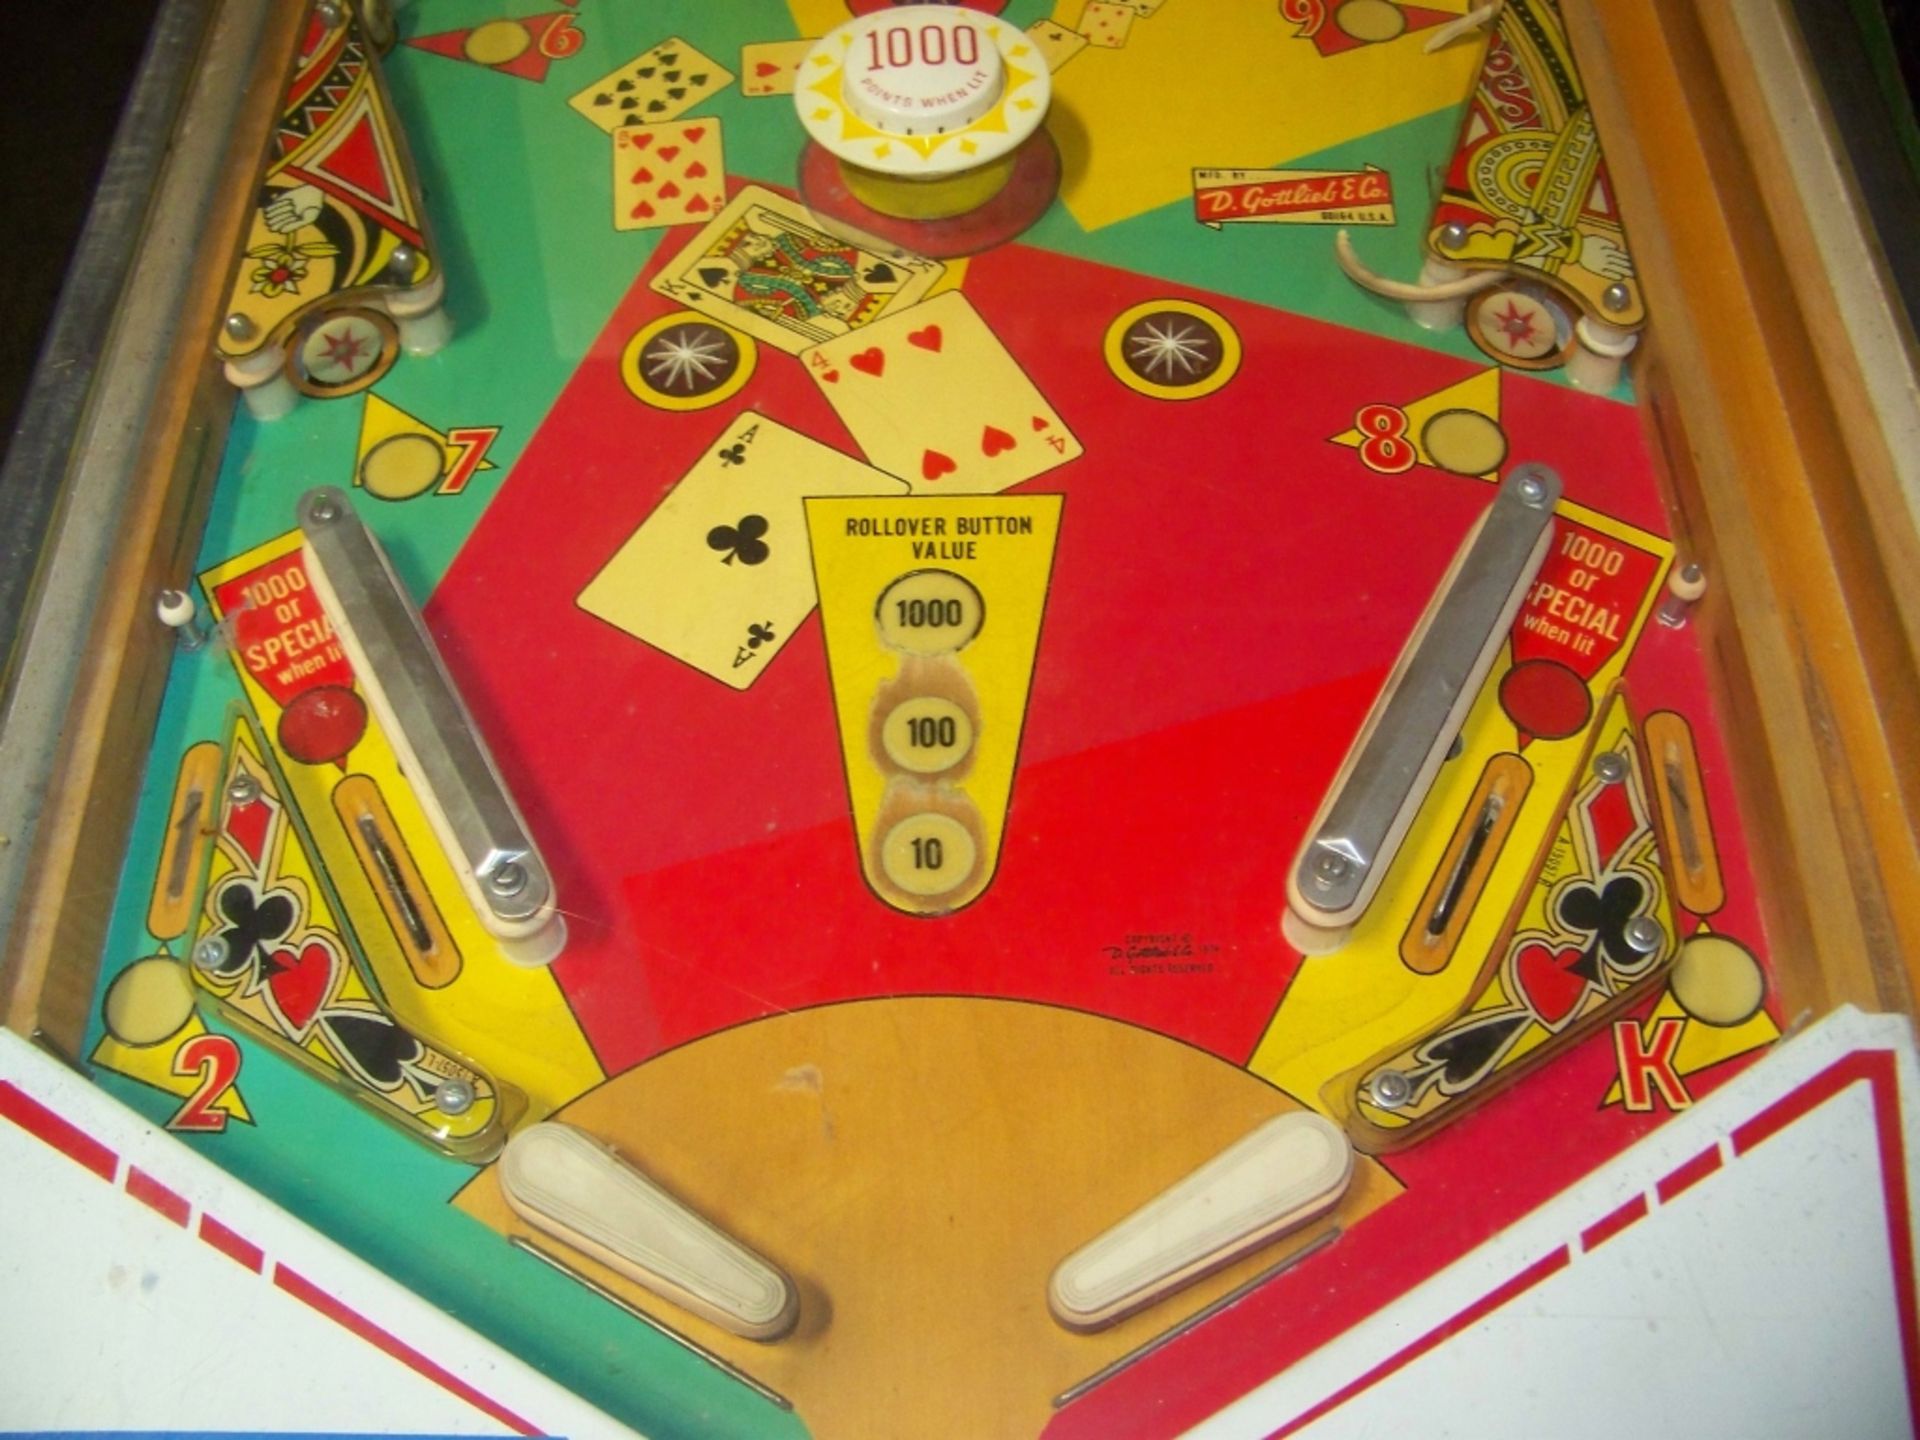 TOP CARD PINBALL MACHINE GOTTLIEB 1974 Item is in used condition. Evidence of wear and commercial - Image 3 of 4